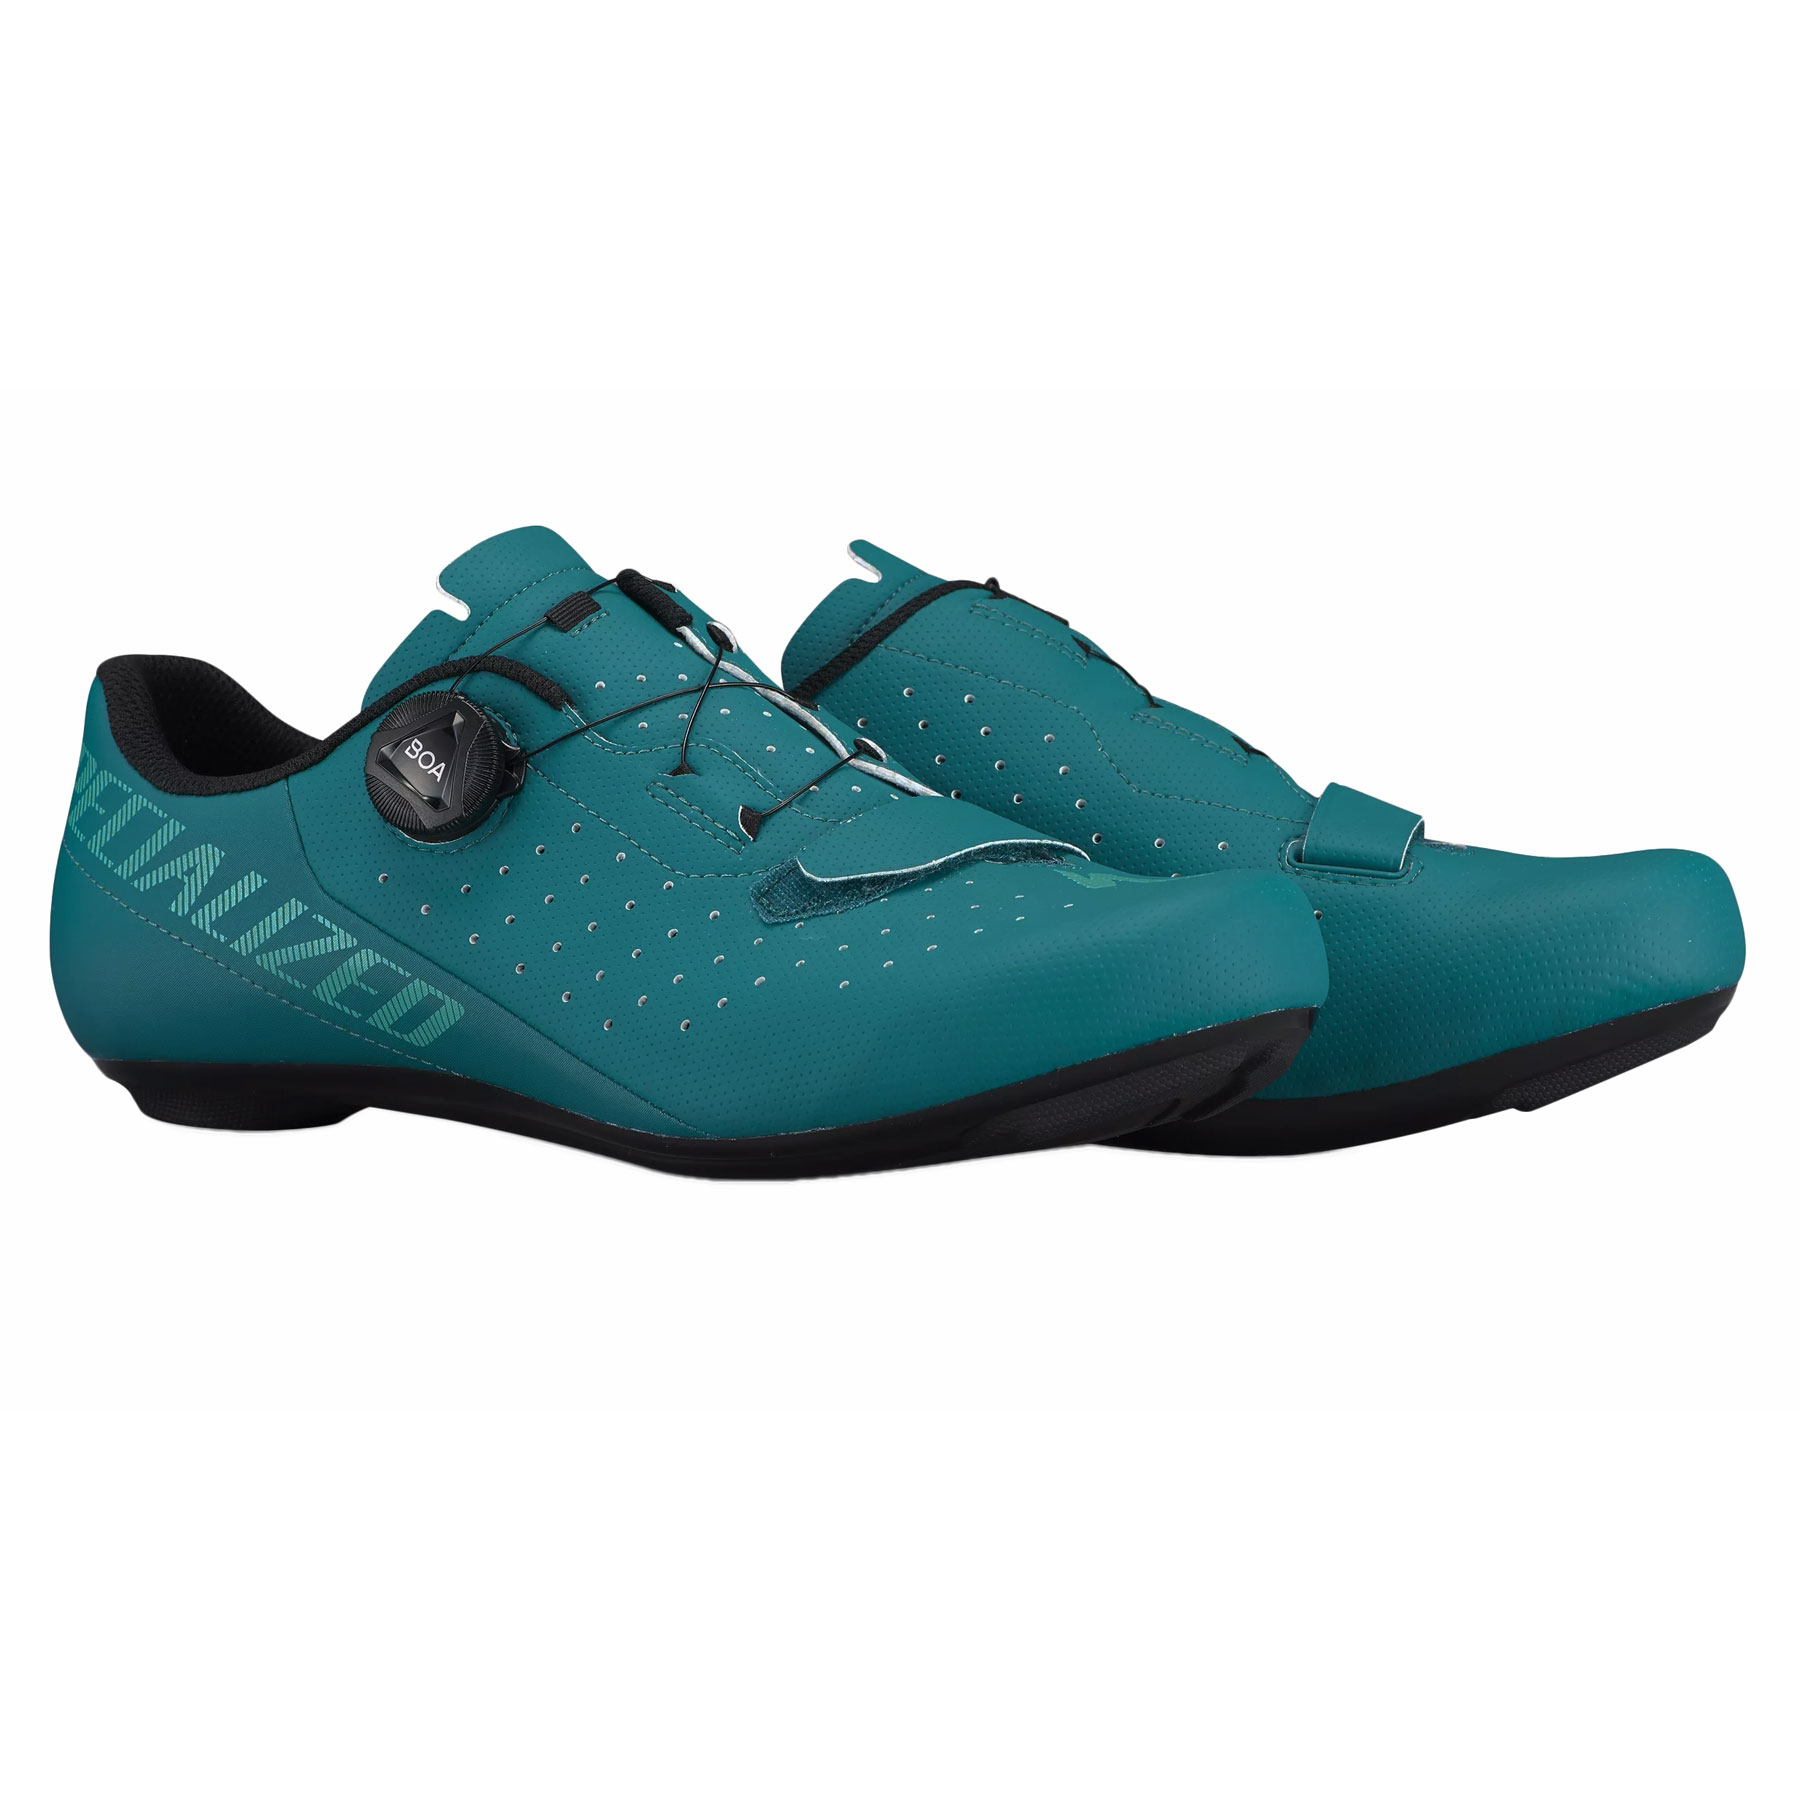 Picture of Specialized Torch 1.0 Road Shoes - Tropical Teal/Limestone